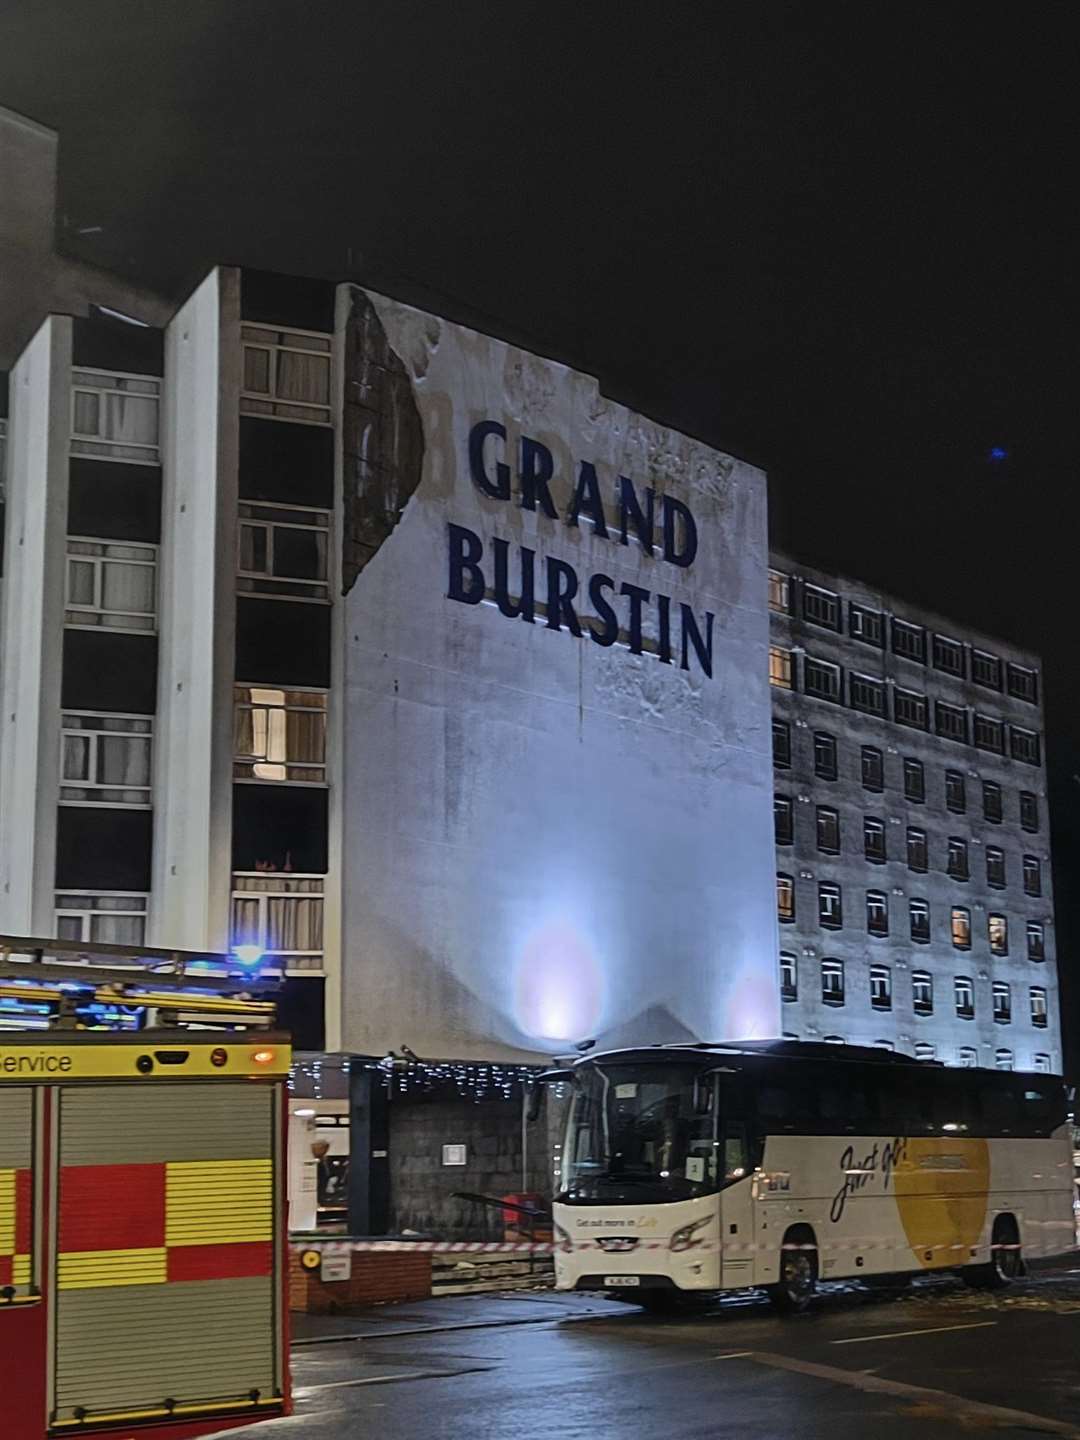 Part of the front of the Grand Burstin Hotel in Folkestone has fallen into the street. Picture: Steve Wood